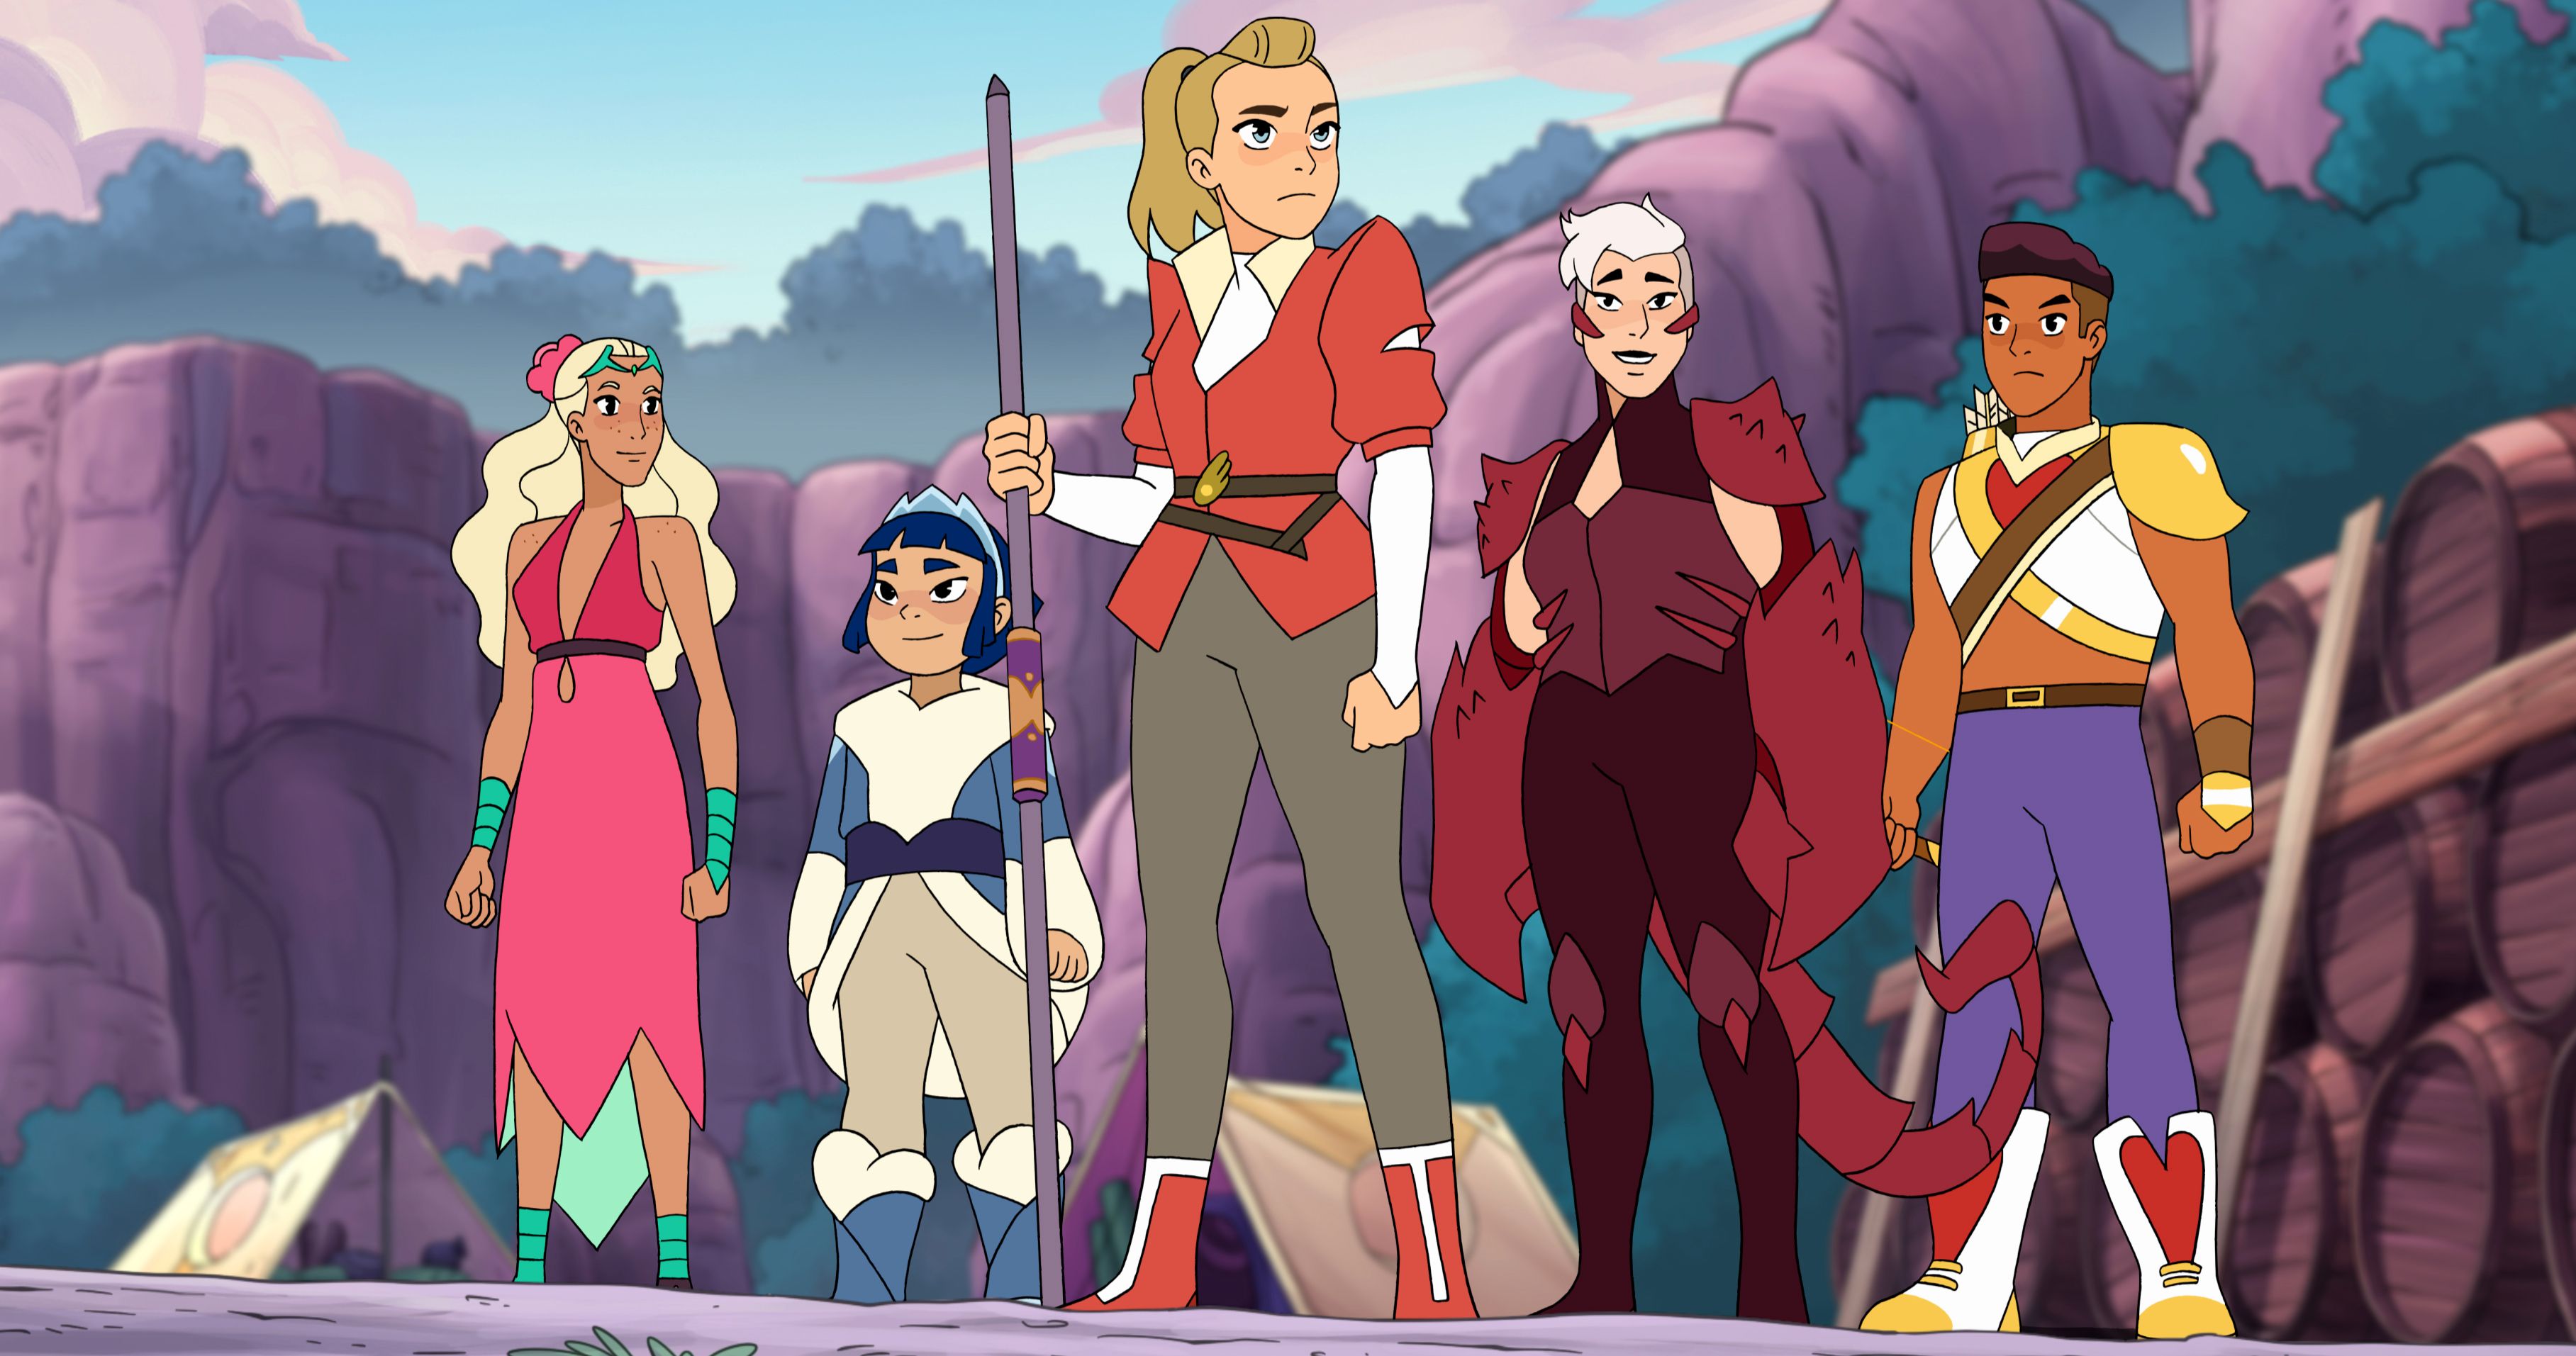 She-Ra and the Princesses of Power Final Season Trailer Prepares for Battle